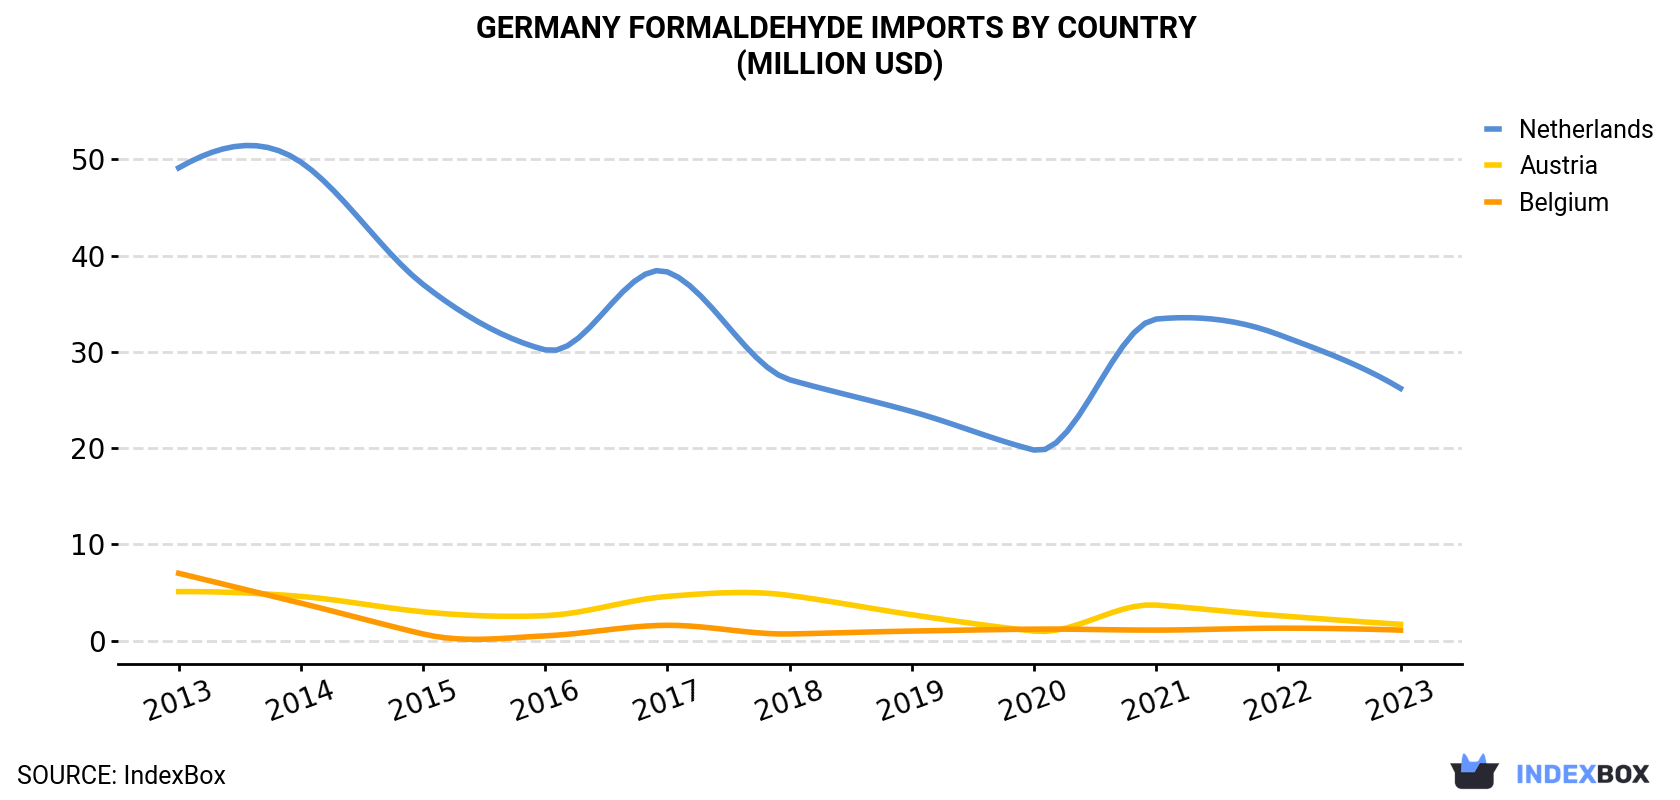 Germany Formaldehyde Imports By Country (Million USD)